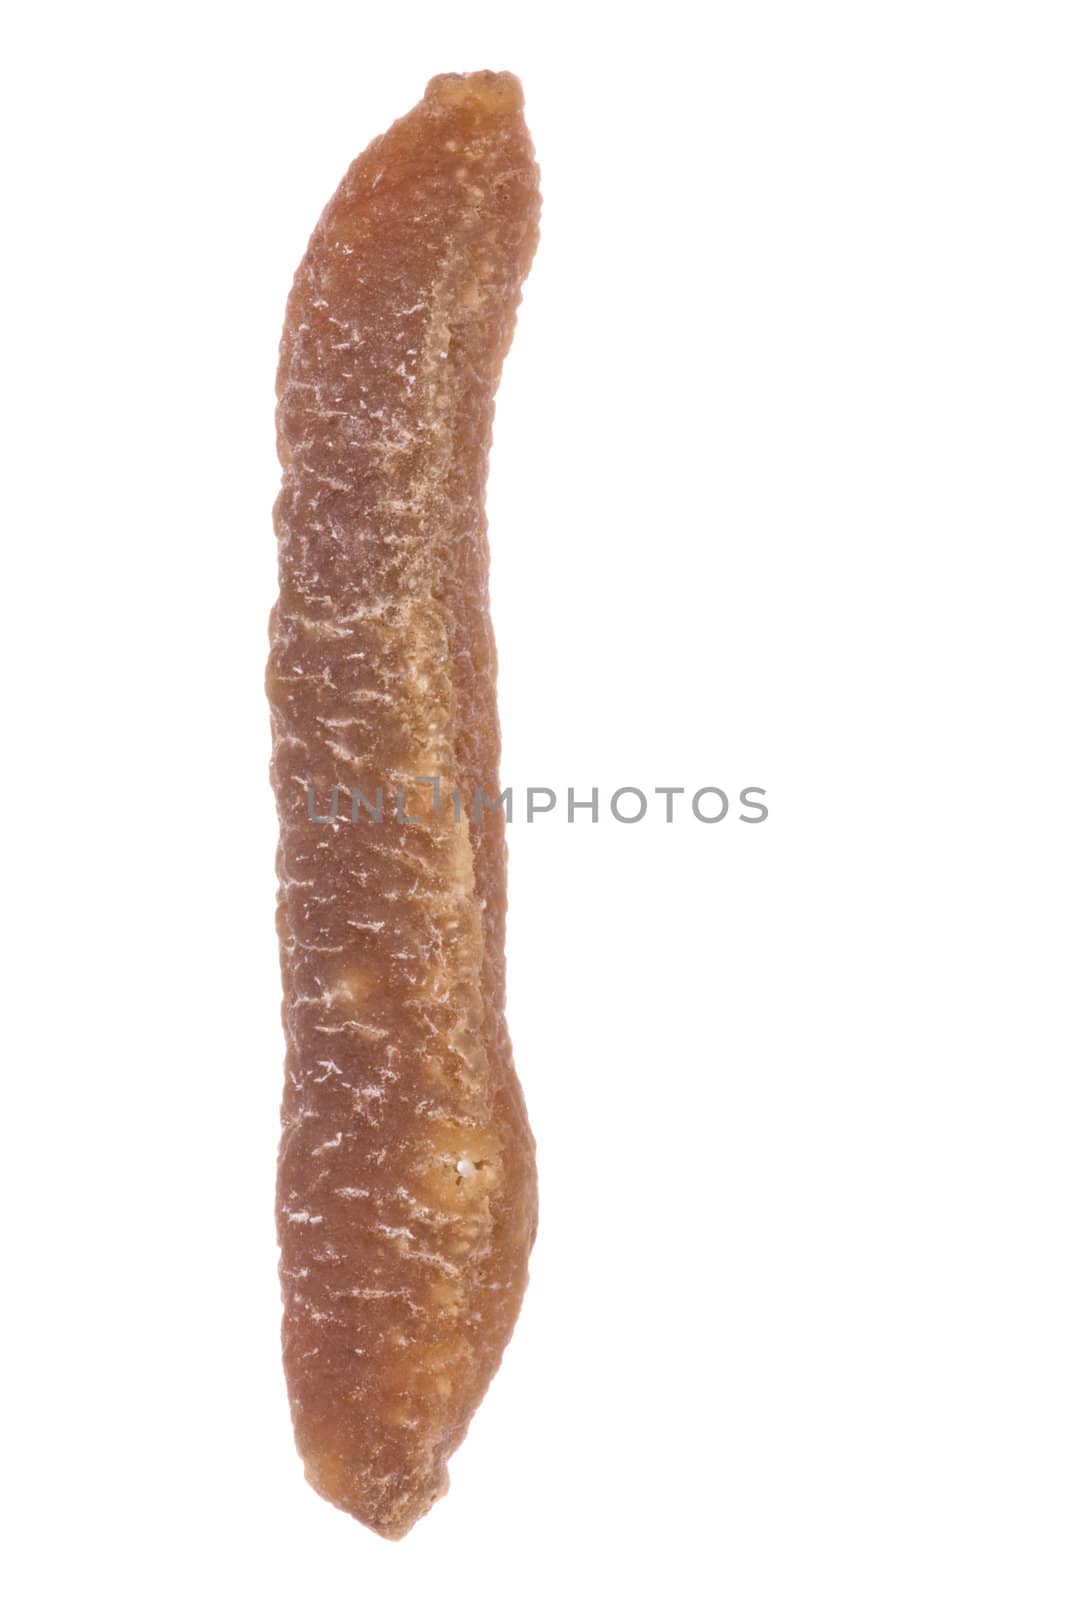 Isolated macro image of a dried sea cucumber.